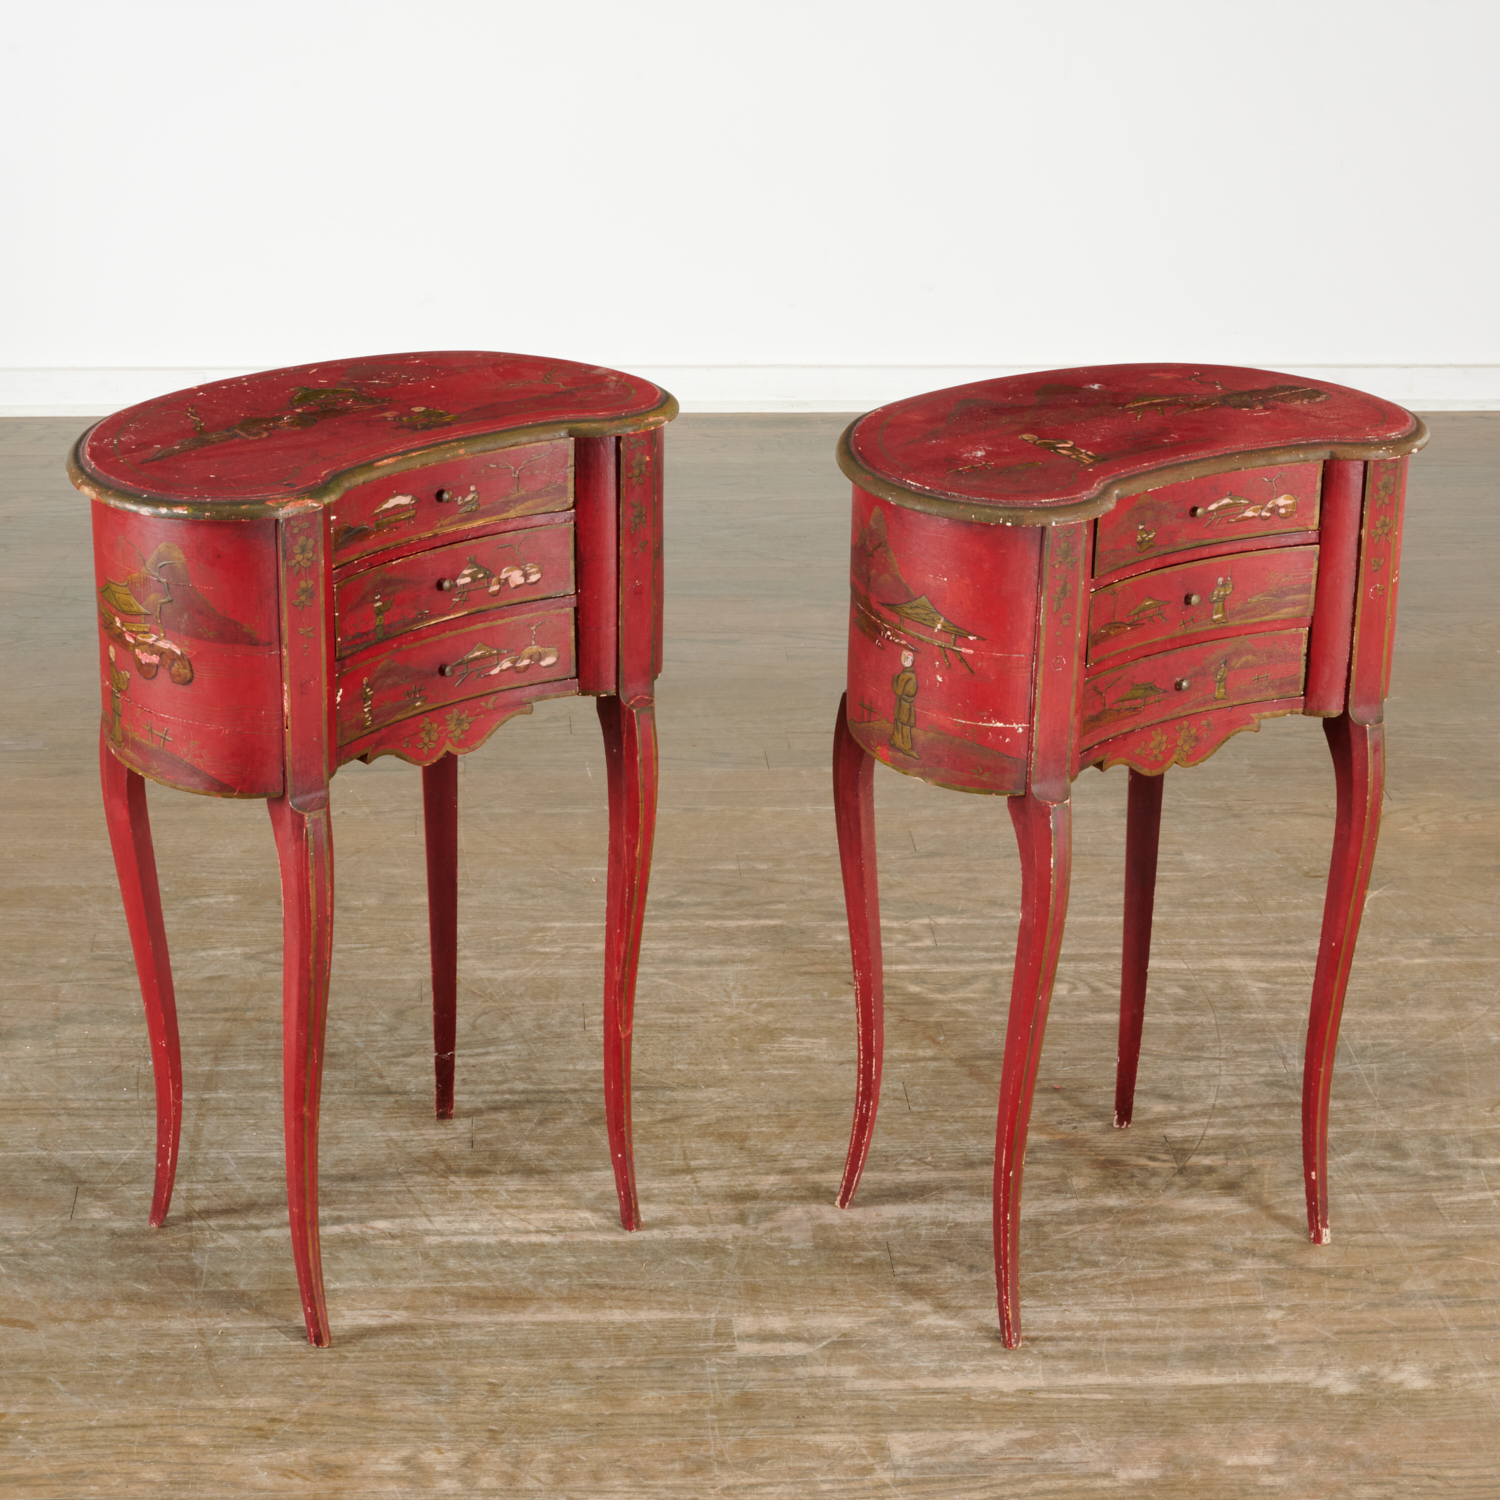 PAIR FRENCH SCARLET JAPANNED SIDE 361b6d